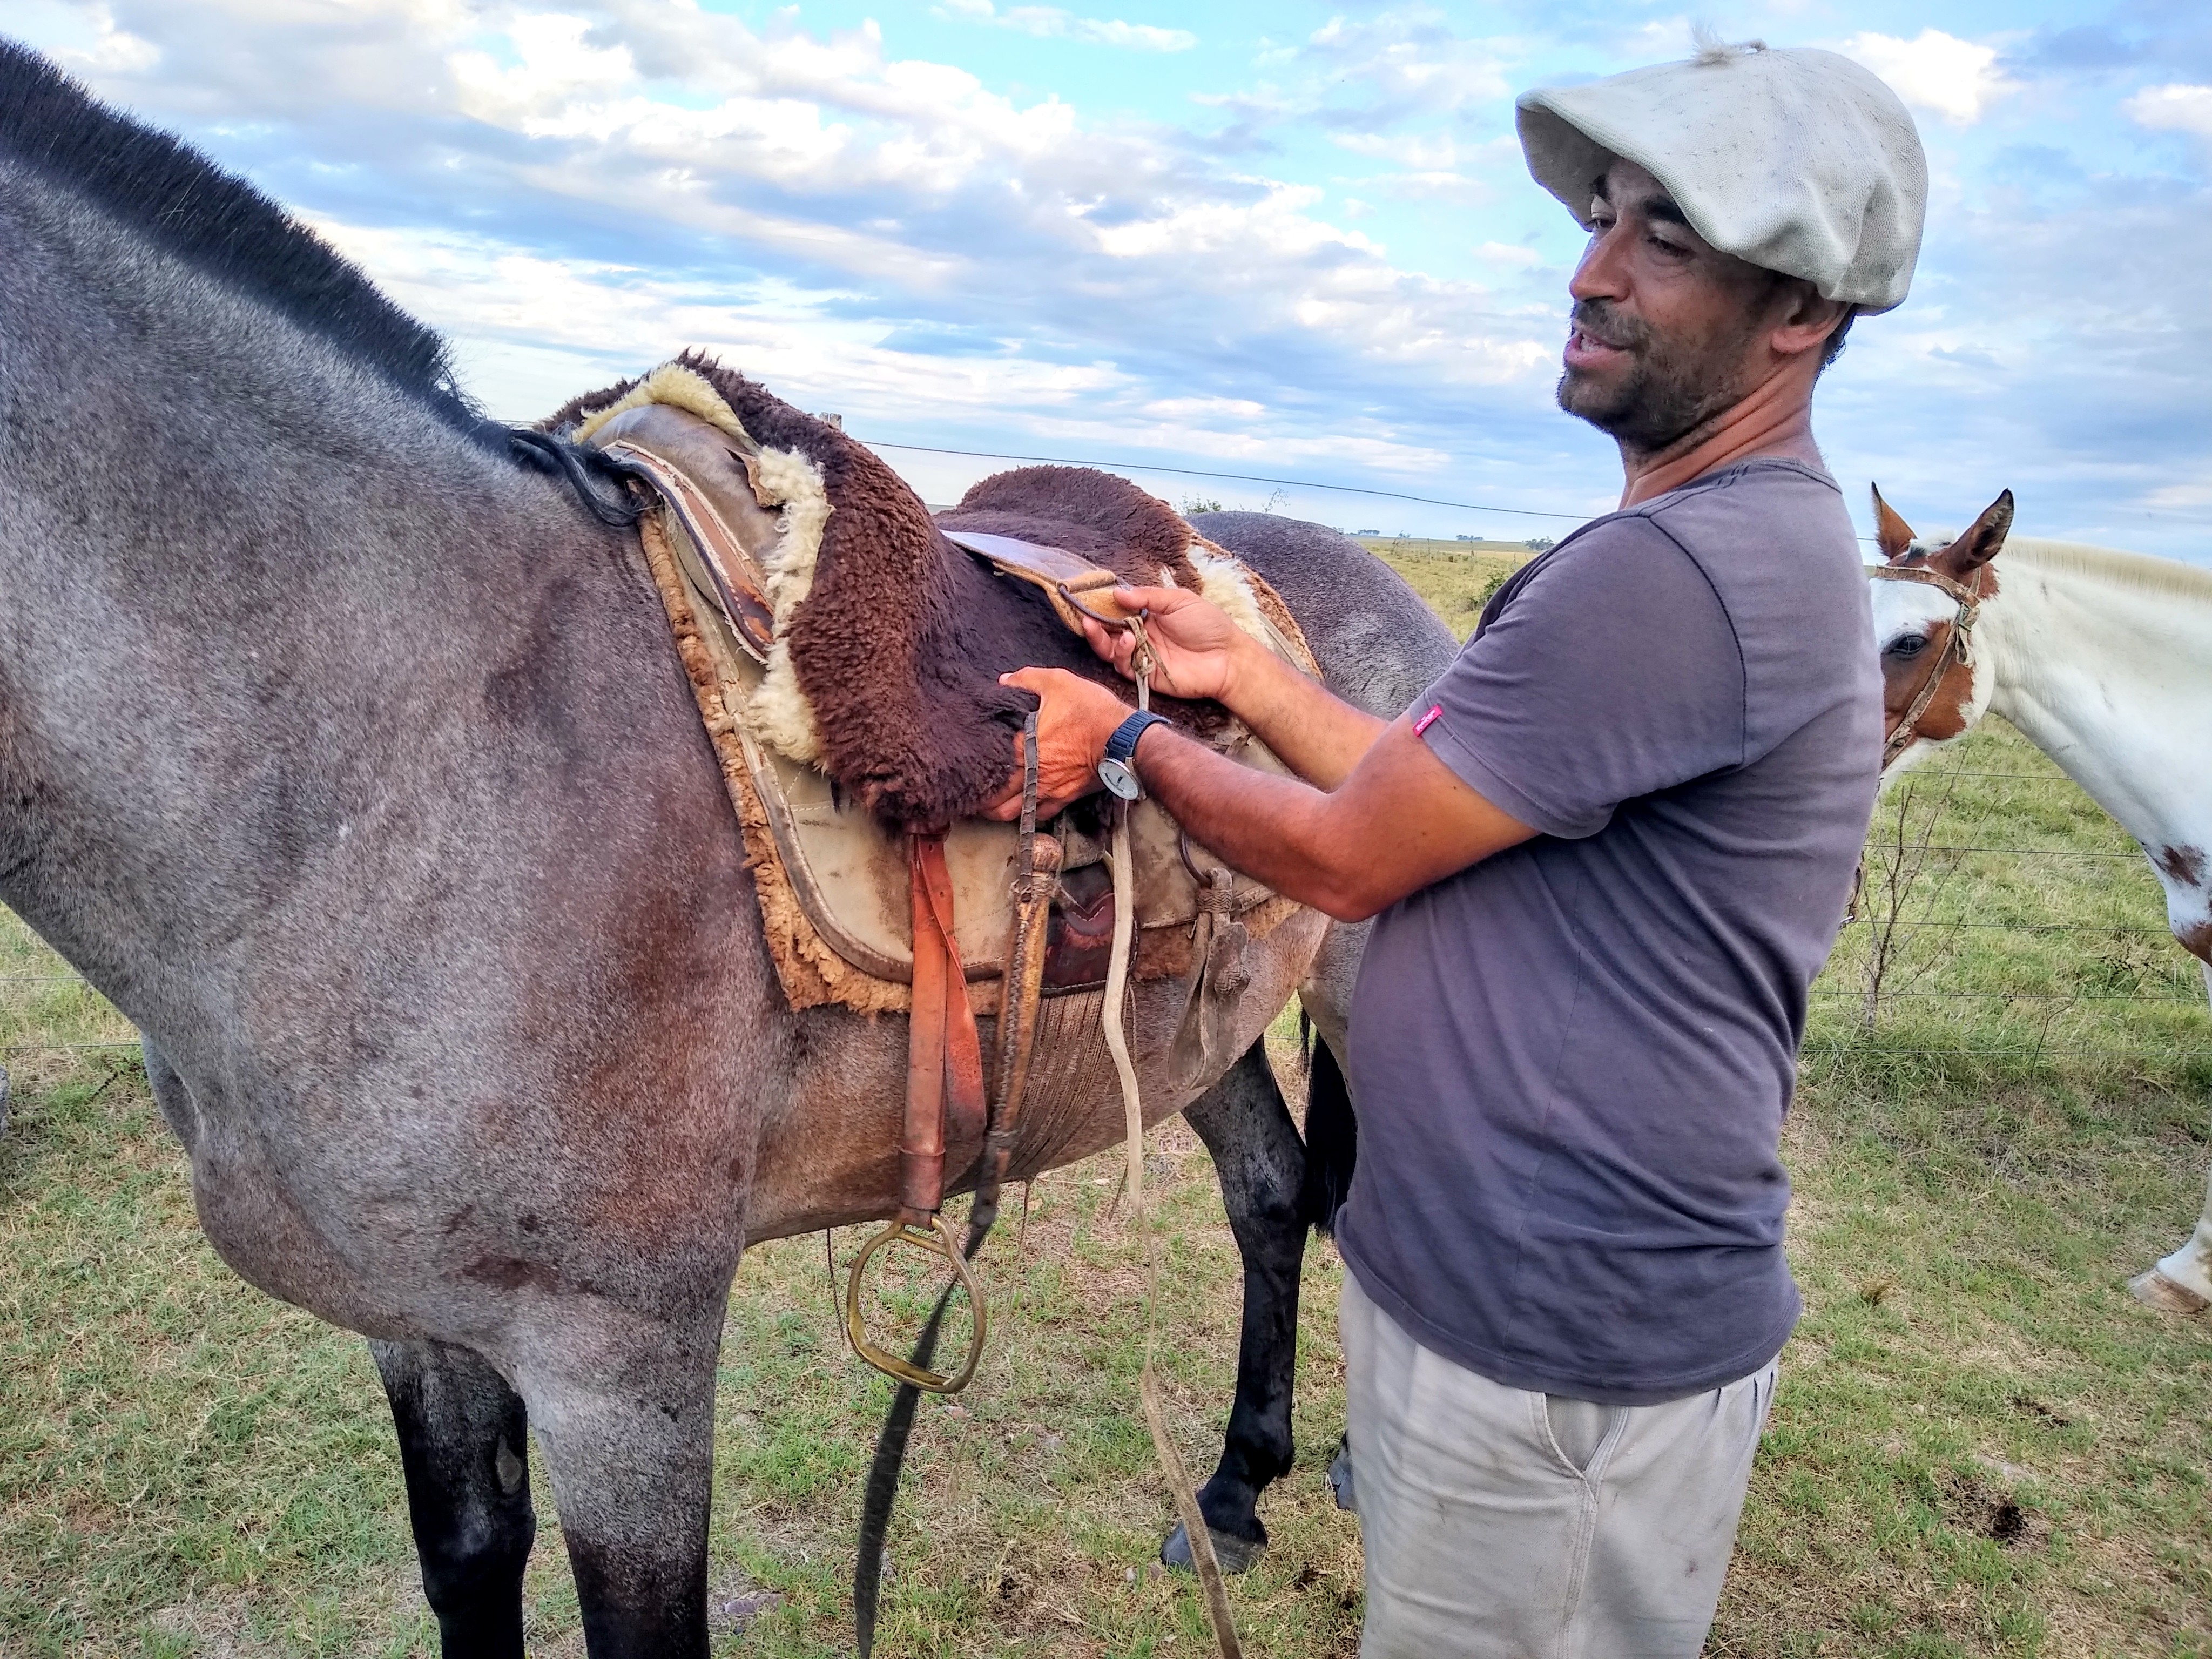 A man standing next to a horse, with his hands on the horse's saddle.